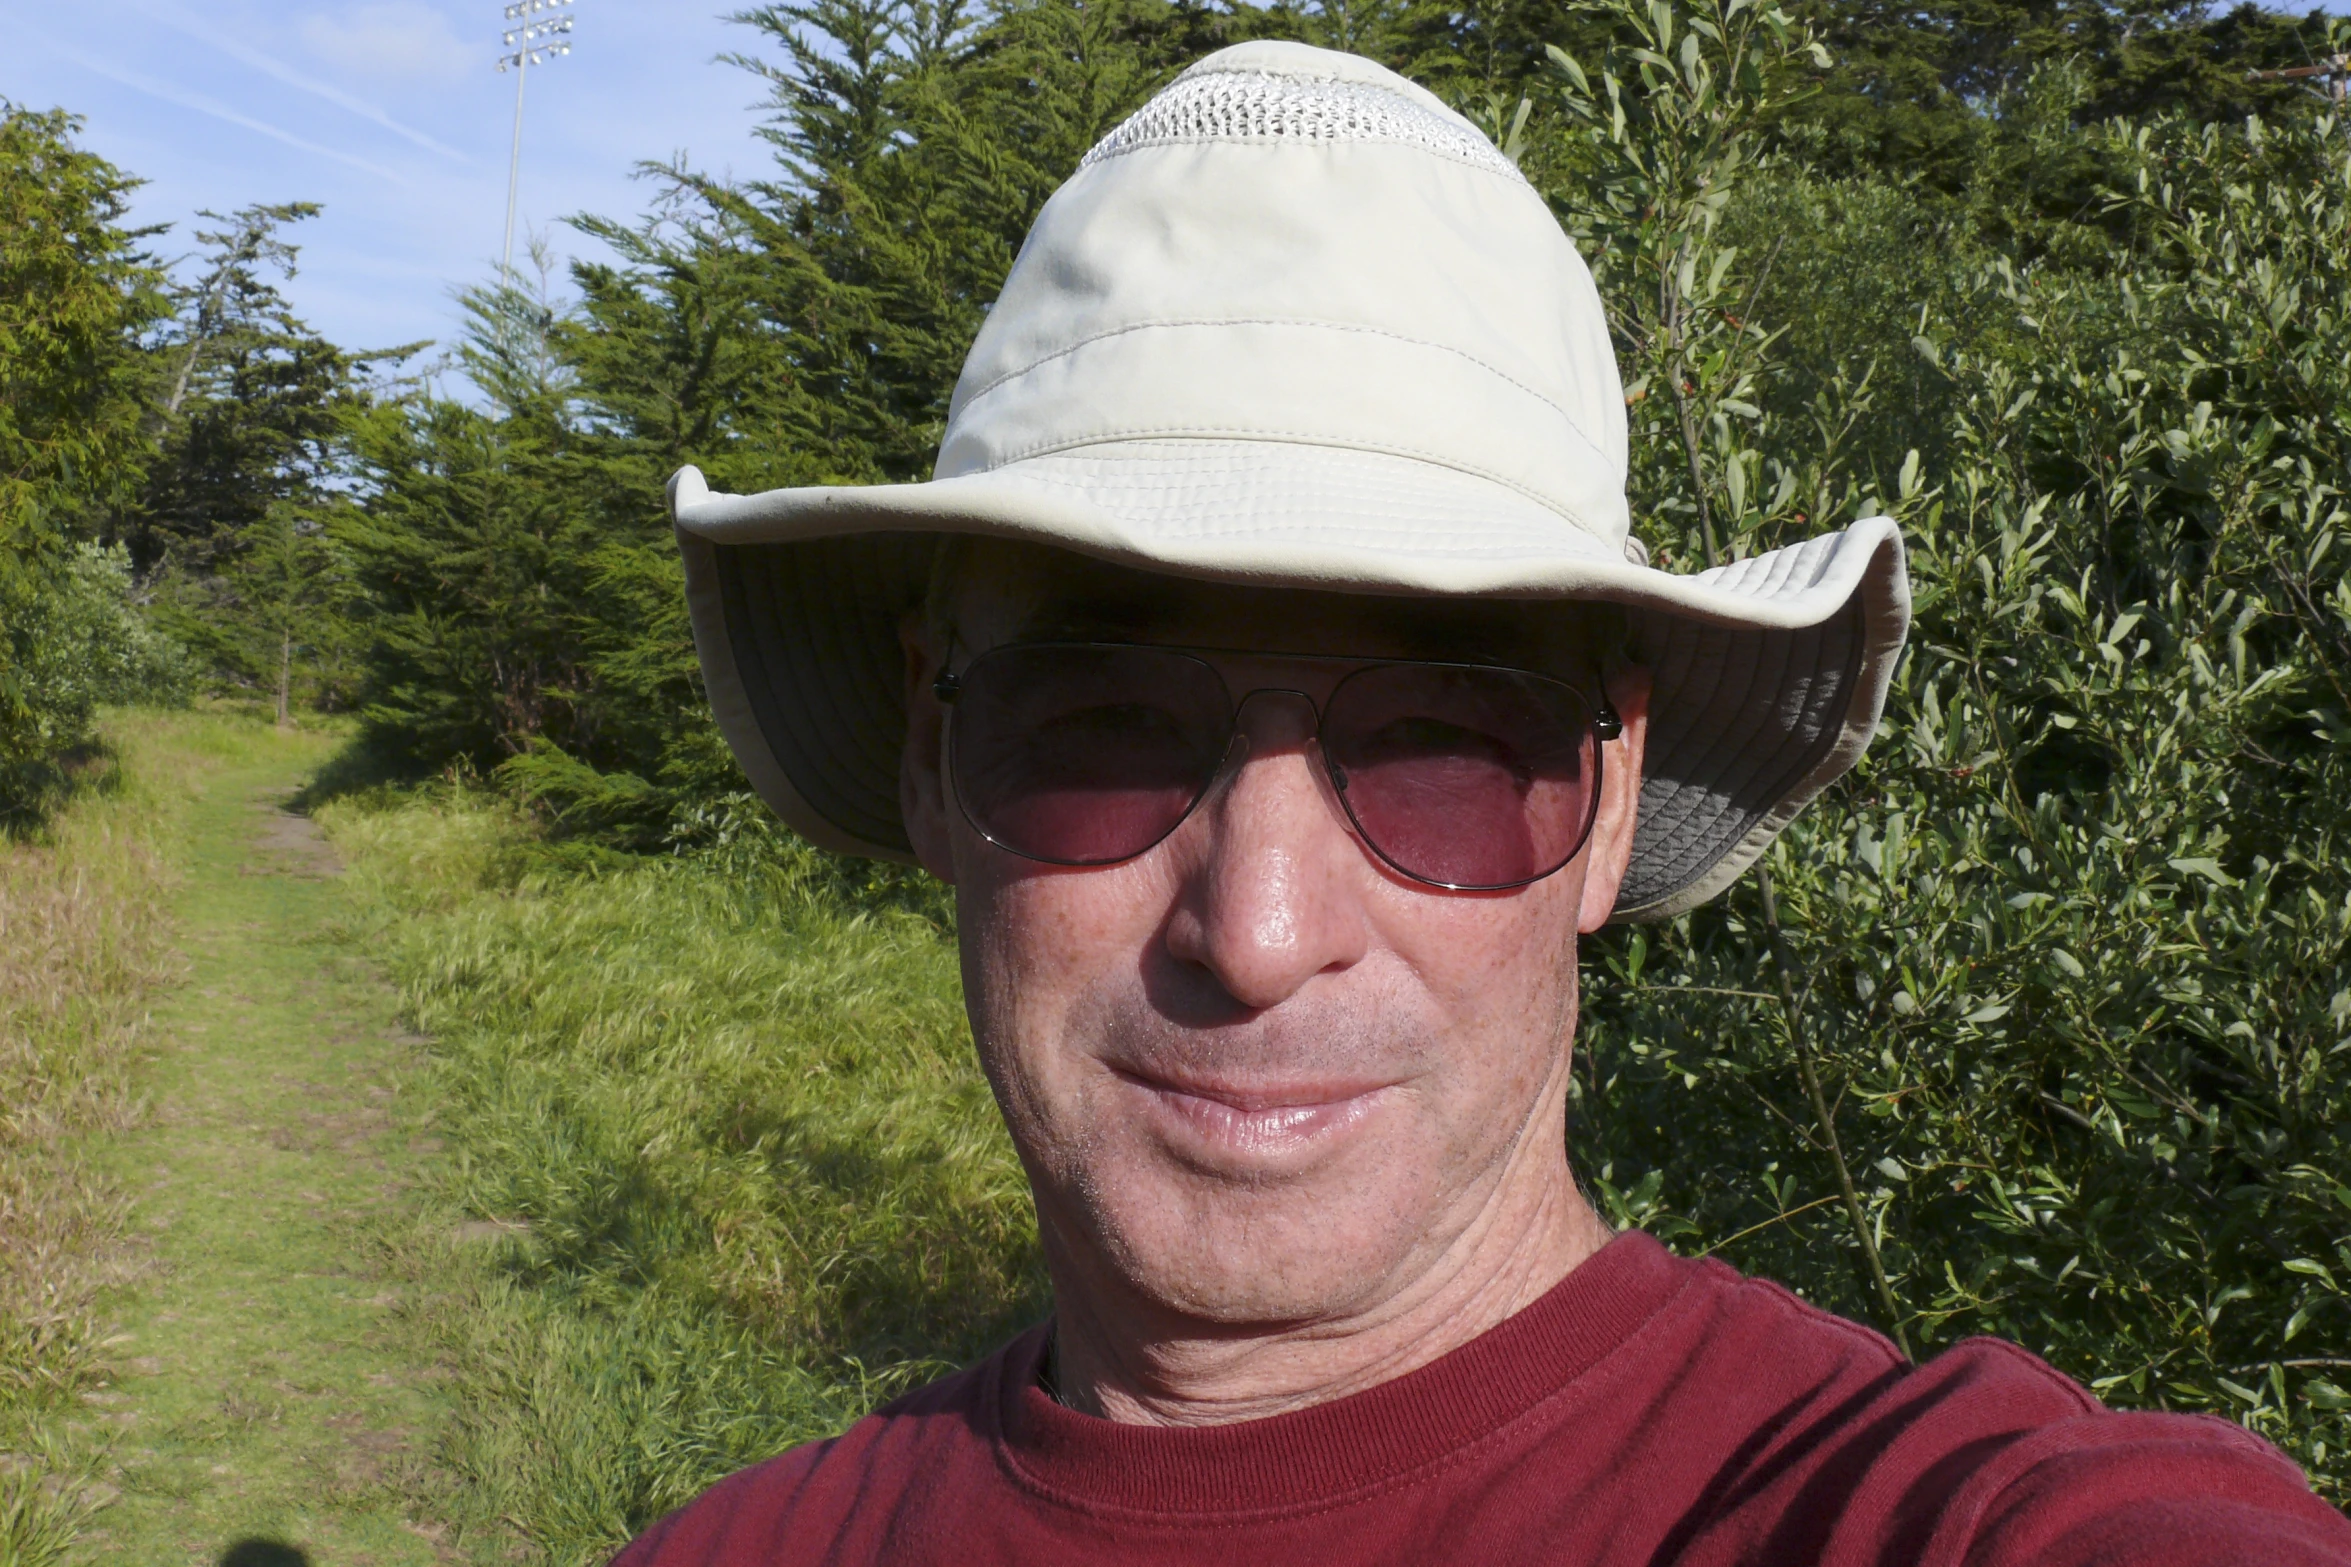 man in hat and sunglasses standing on a dirt path